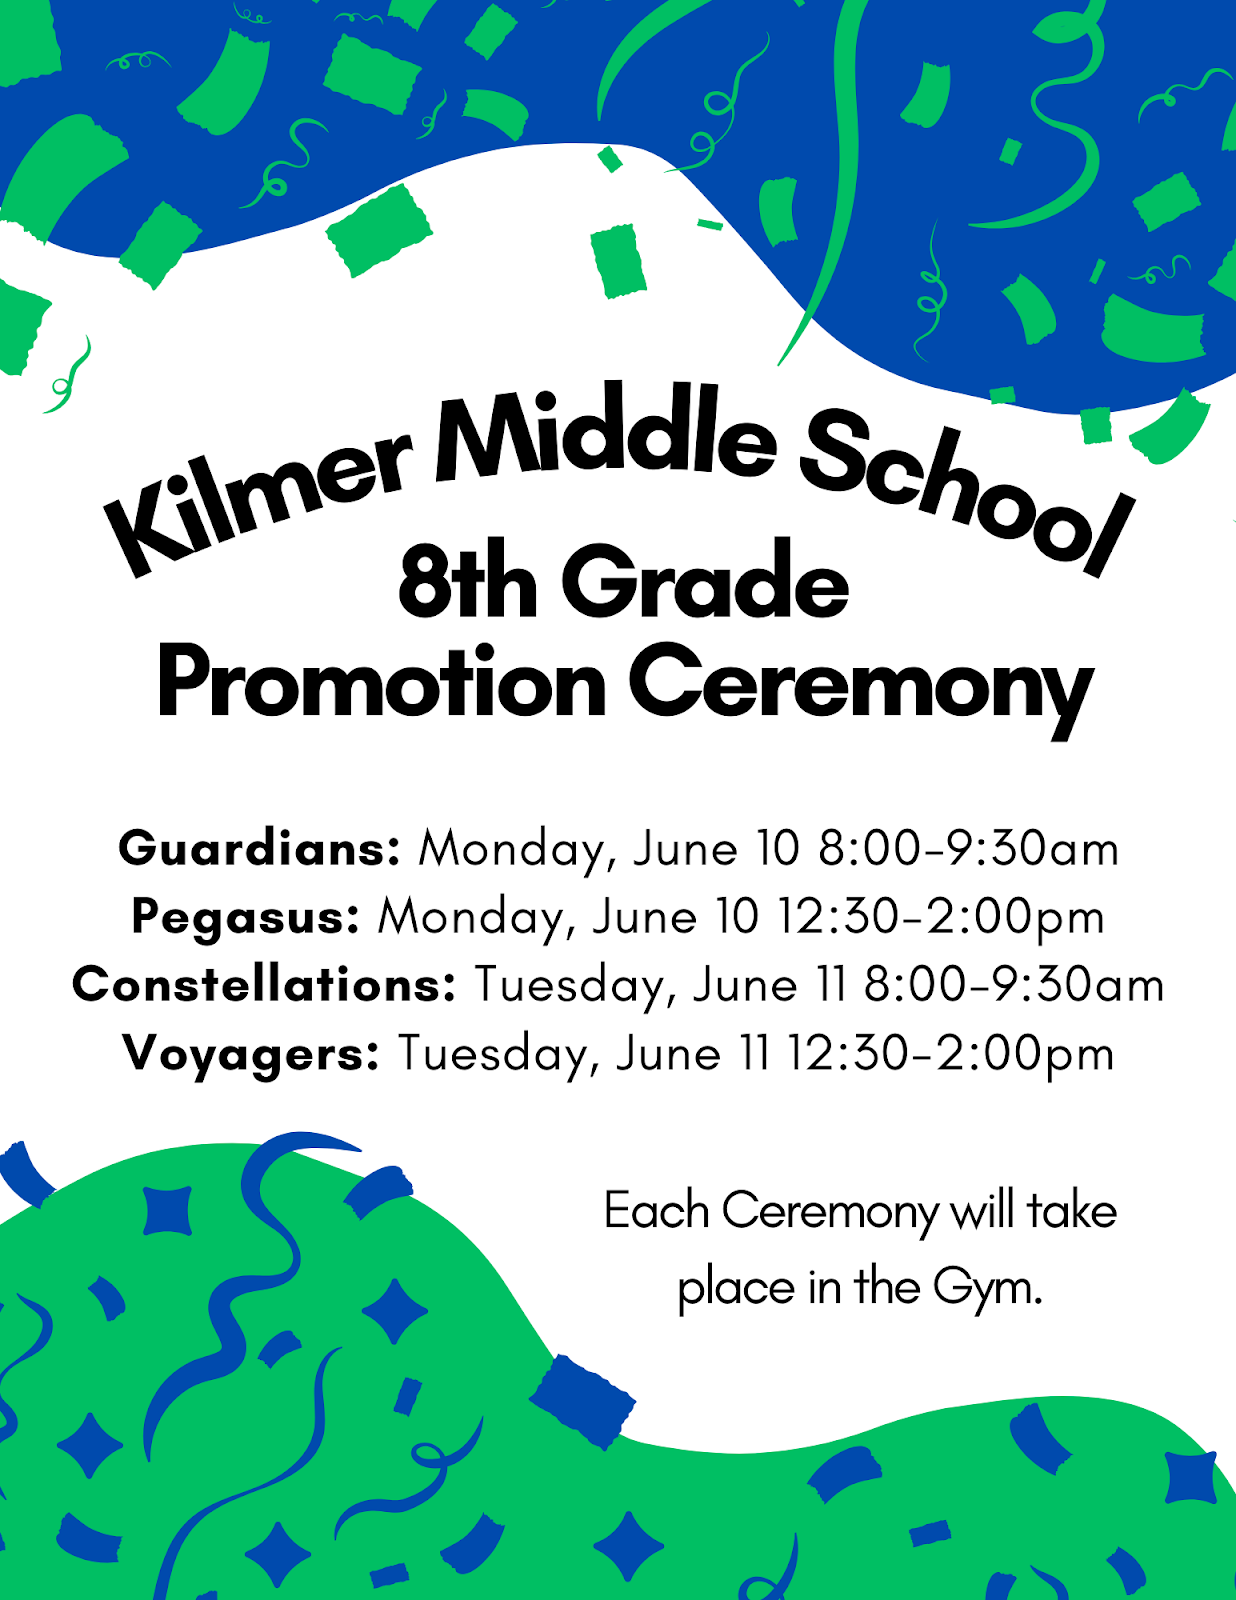 Kilmer Middle School 8th Grade promotion ceremony flyer. Guardians 6/10 8:00-9:30 am, Pegasus 6/10 12:30-2:00 pm, Constellations 6/11 8:00-9:30 am, Voyagers 6/11 12:30-2:00pm. Each ceremony will take place in the gym